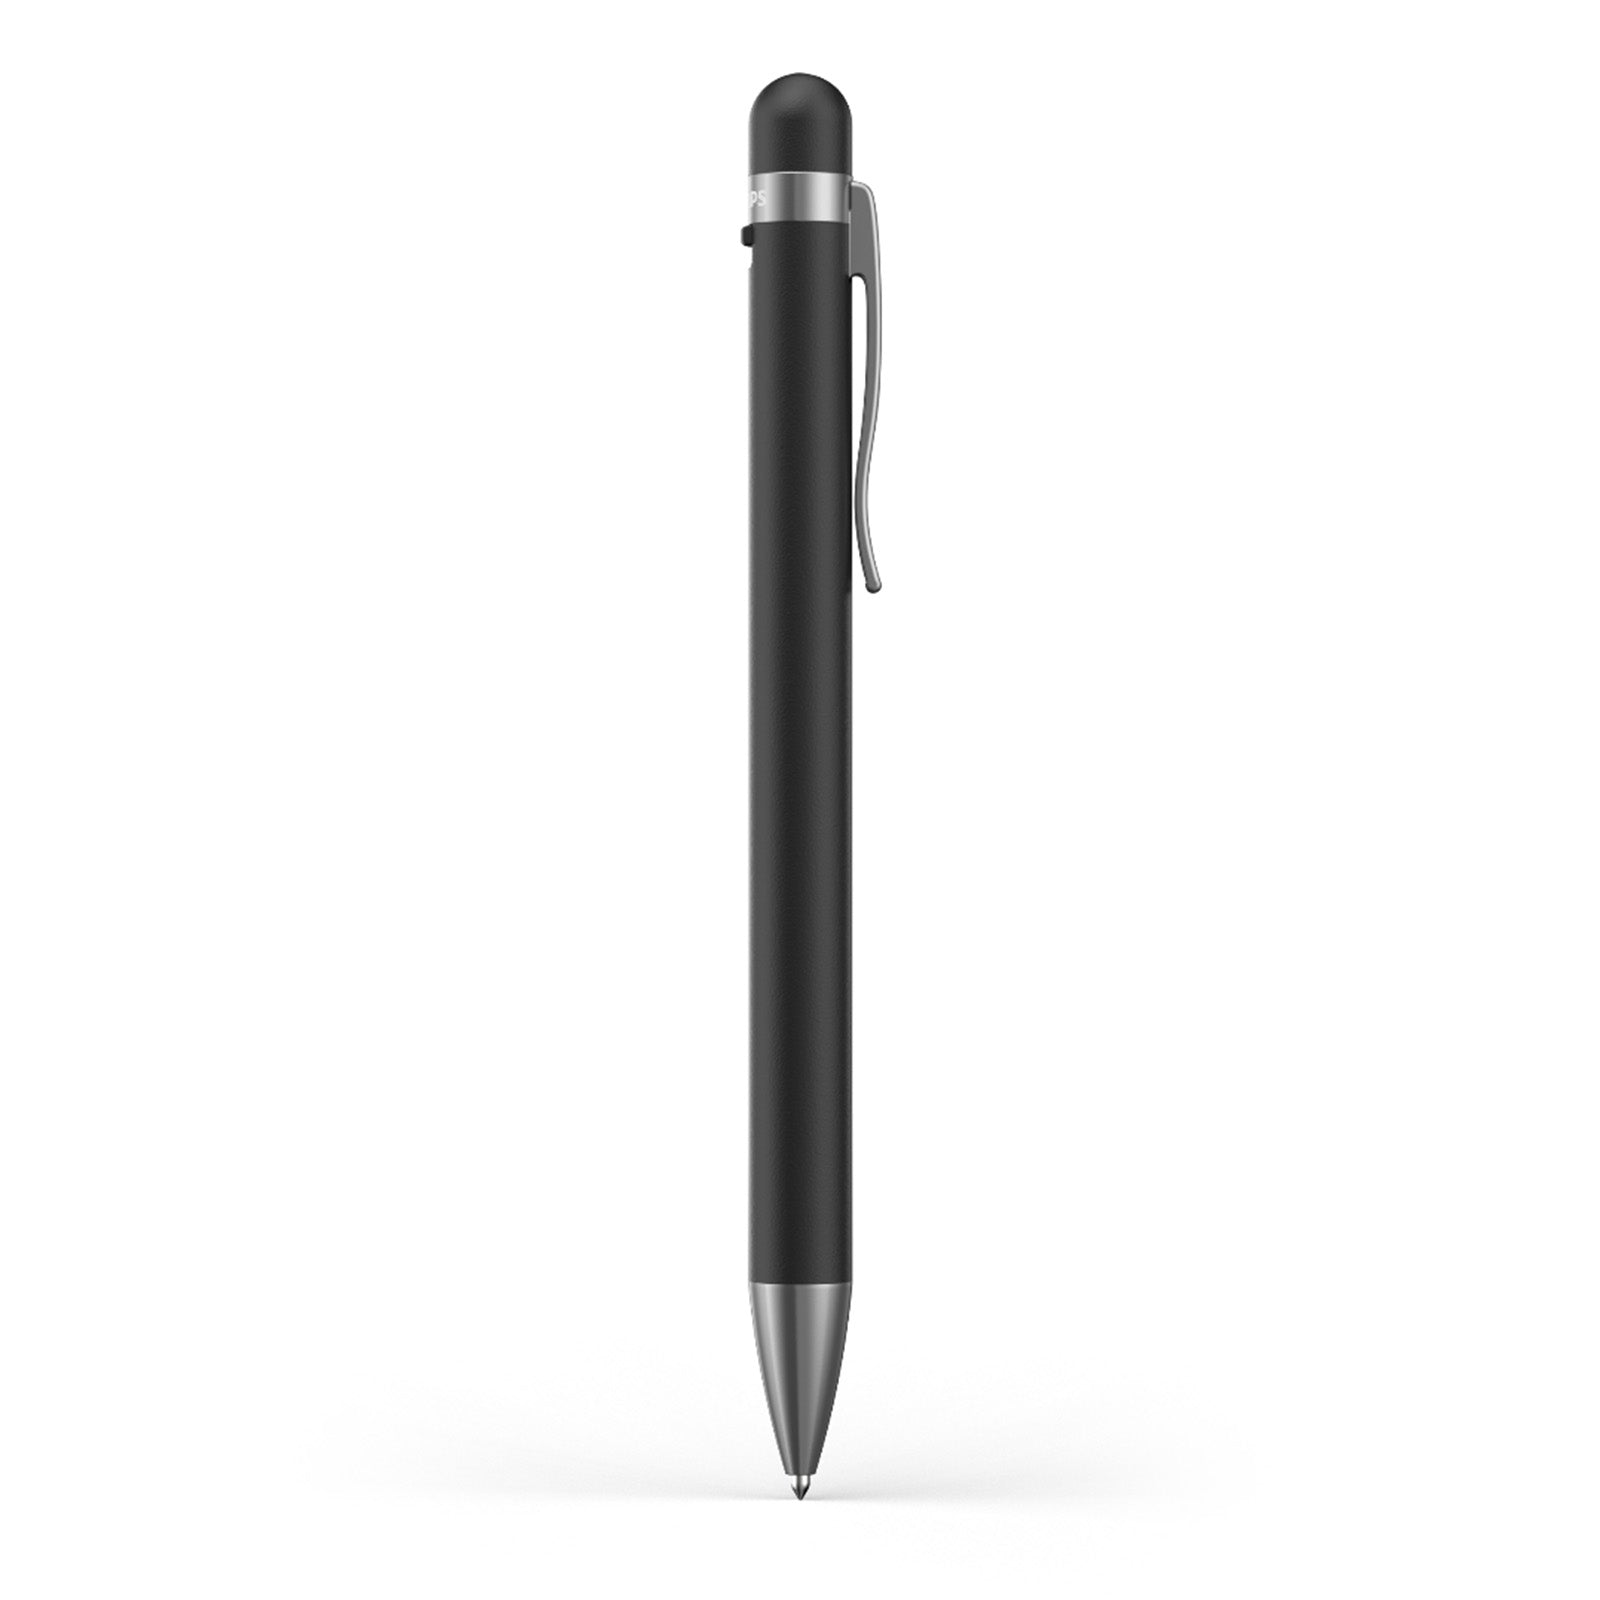 Philips DVT1600 Voice Tracer Audio Recorder Pen 32GB with Sembly's AI Speech-to-Text Cloud Software